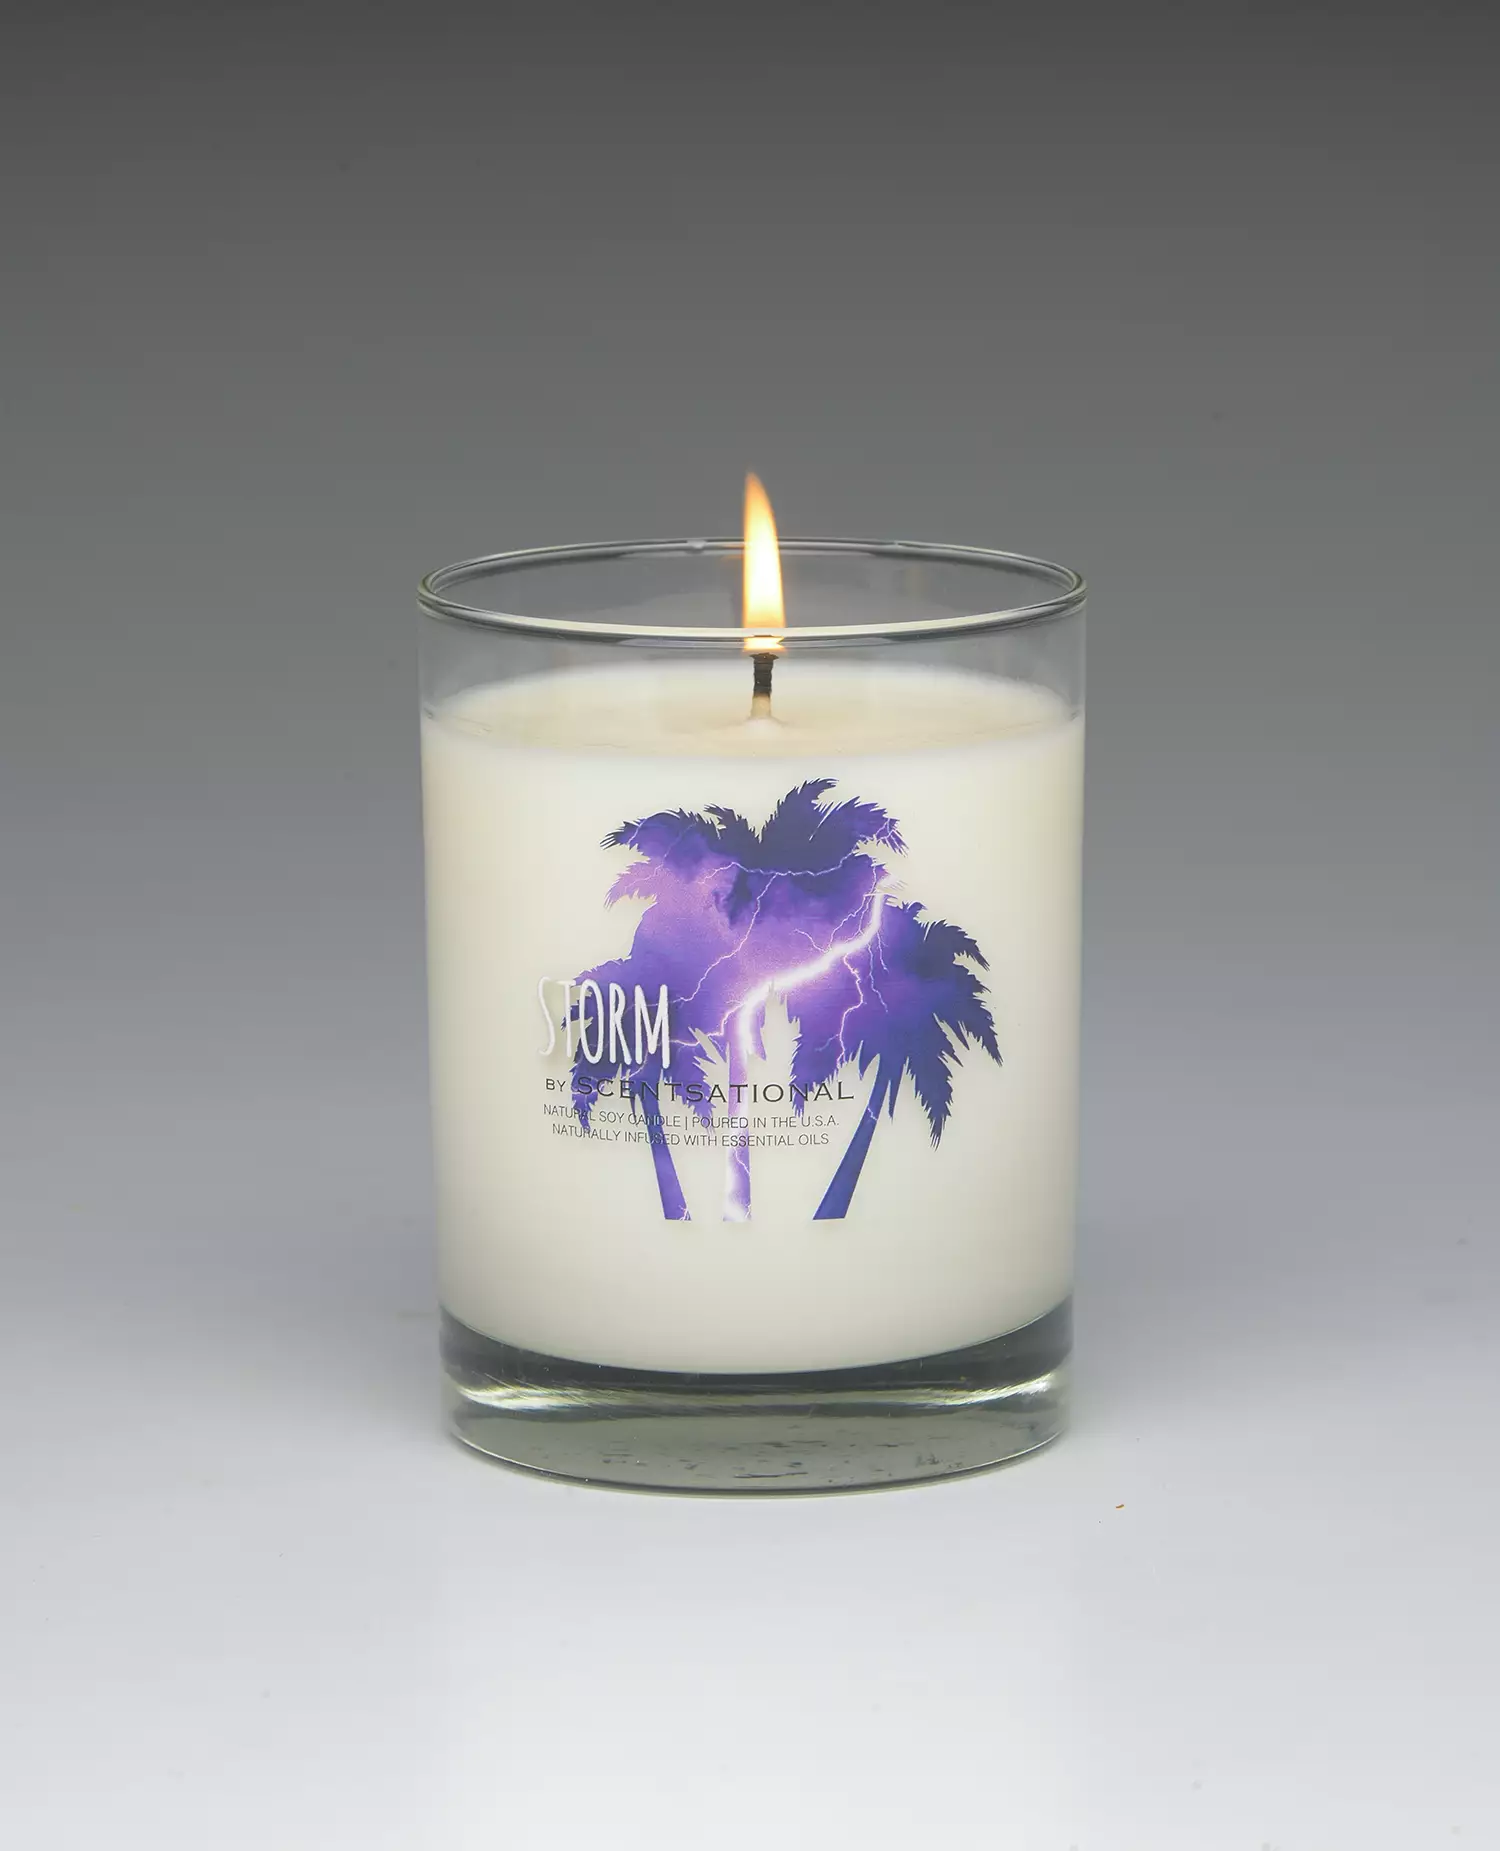 Storm – 11oz scented candle burning